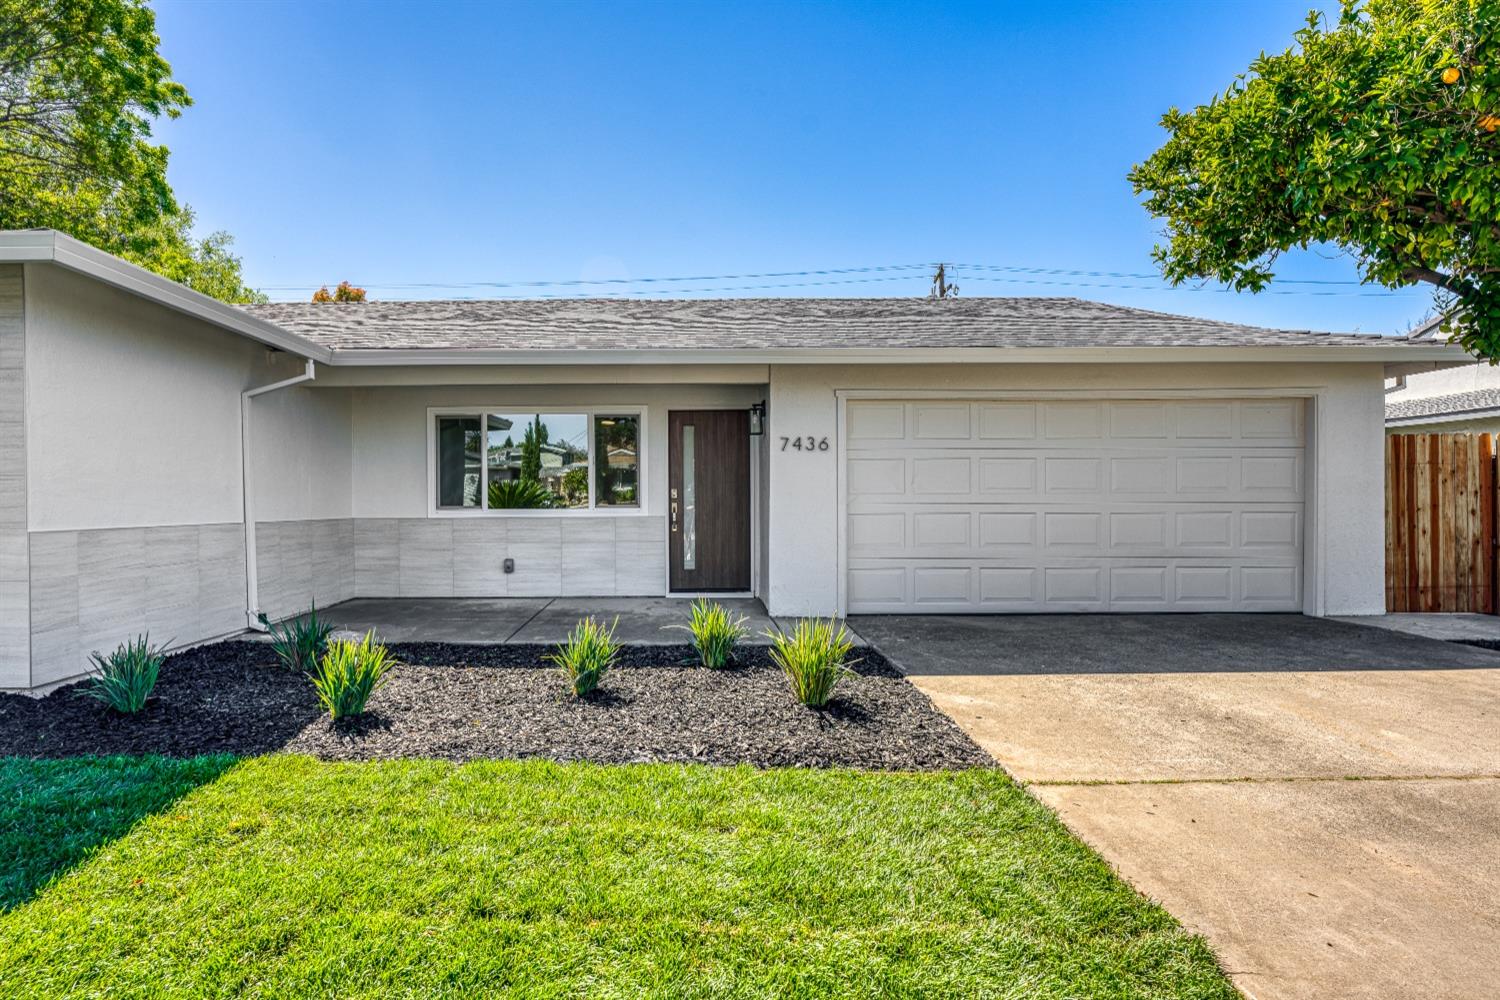 Photo of 7436 Kingsmen Ave in Citrus Heights, CA